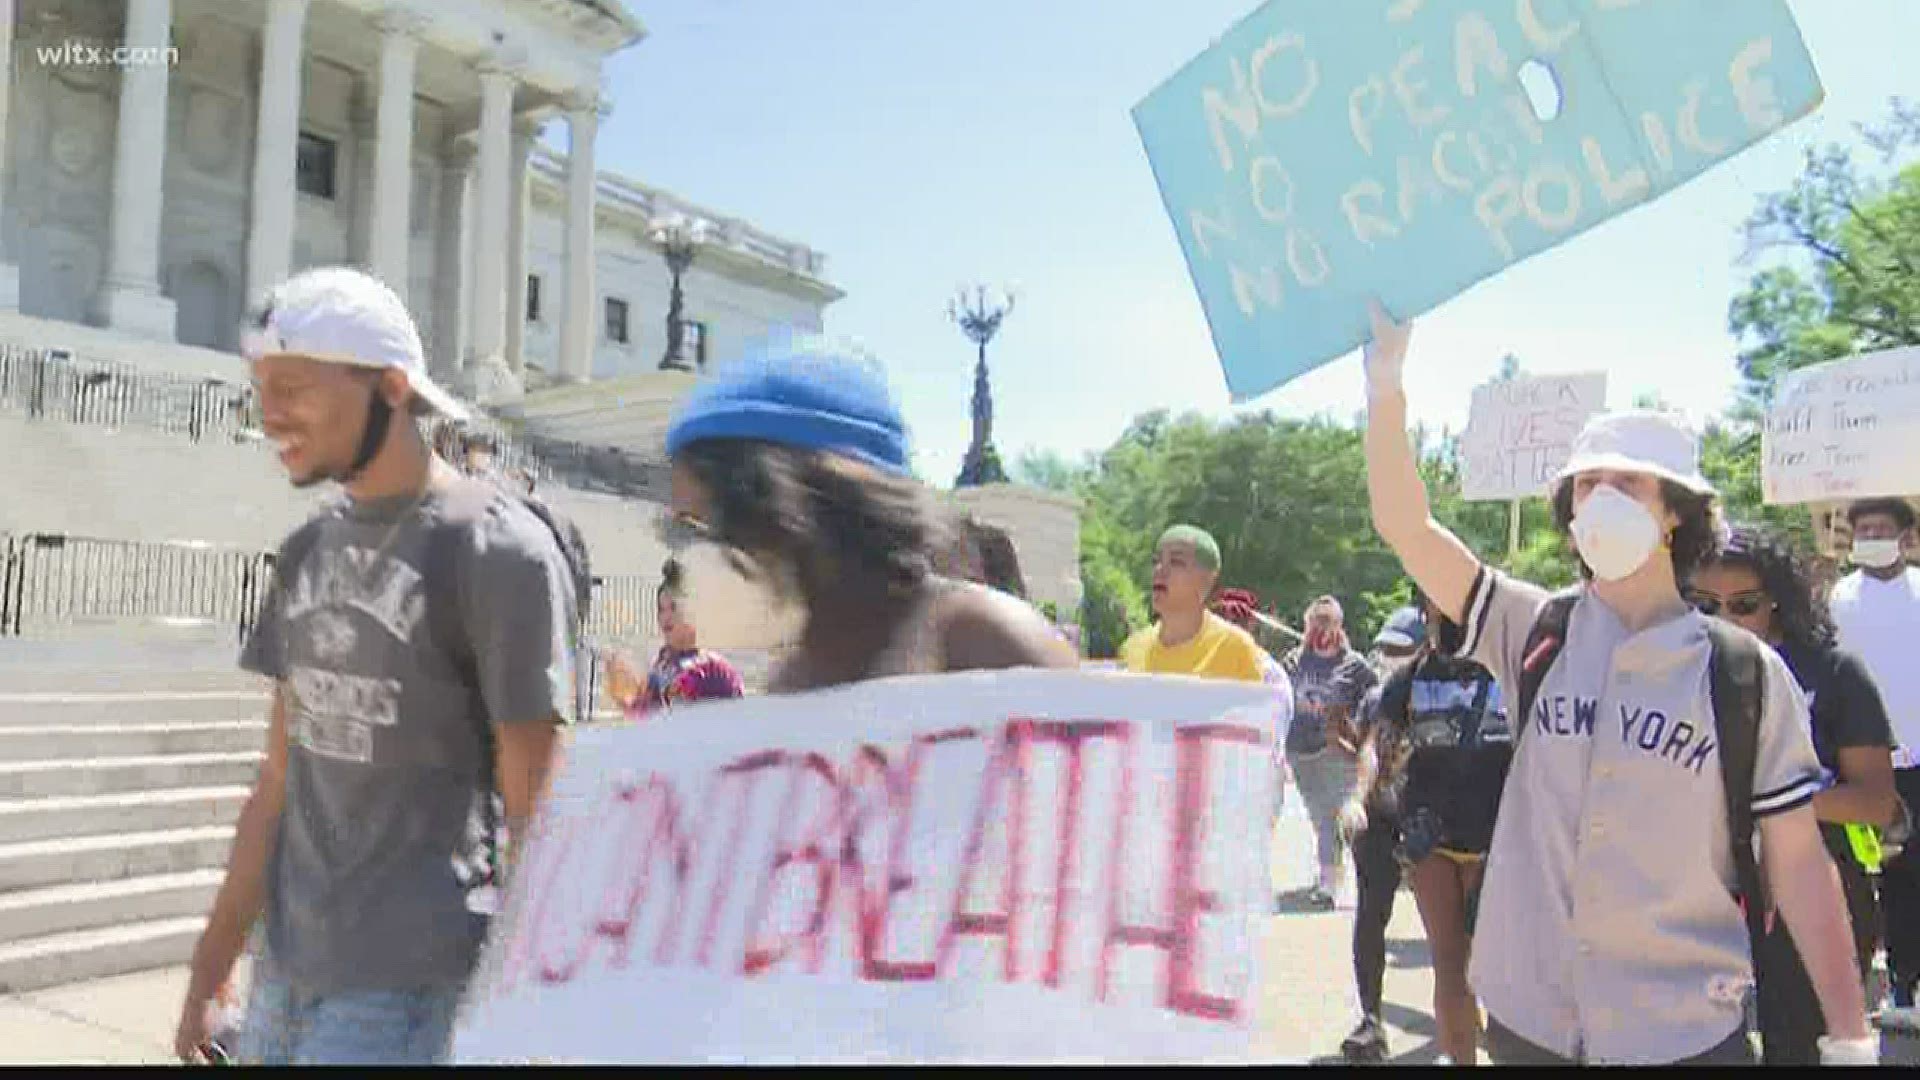 The peaceful protests were at the State House today and began at 2pm and lasted until about 7pm